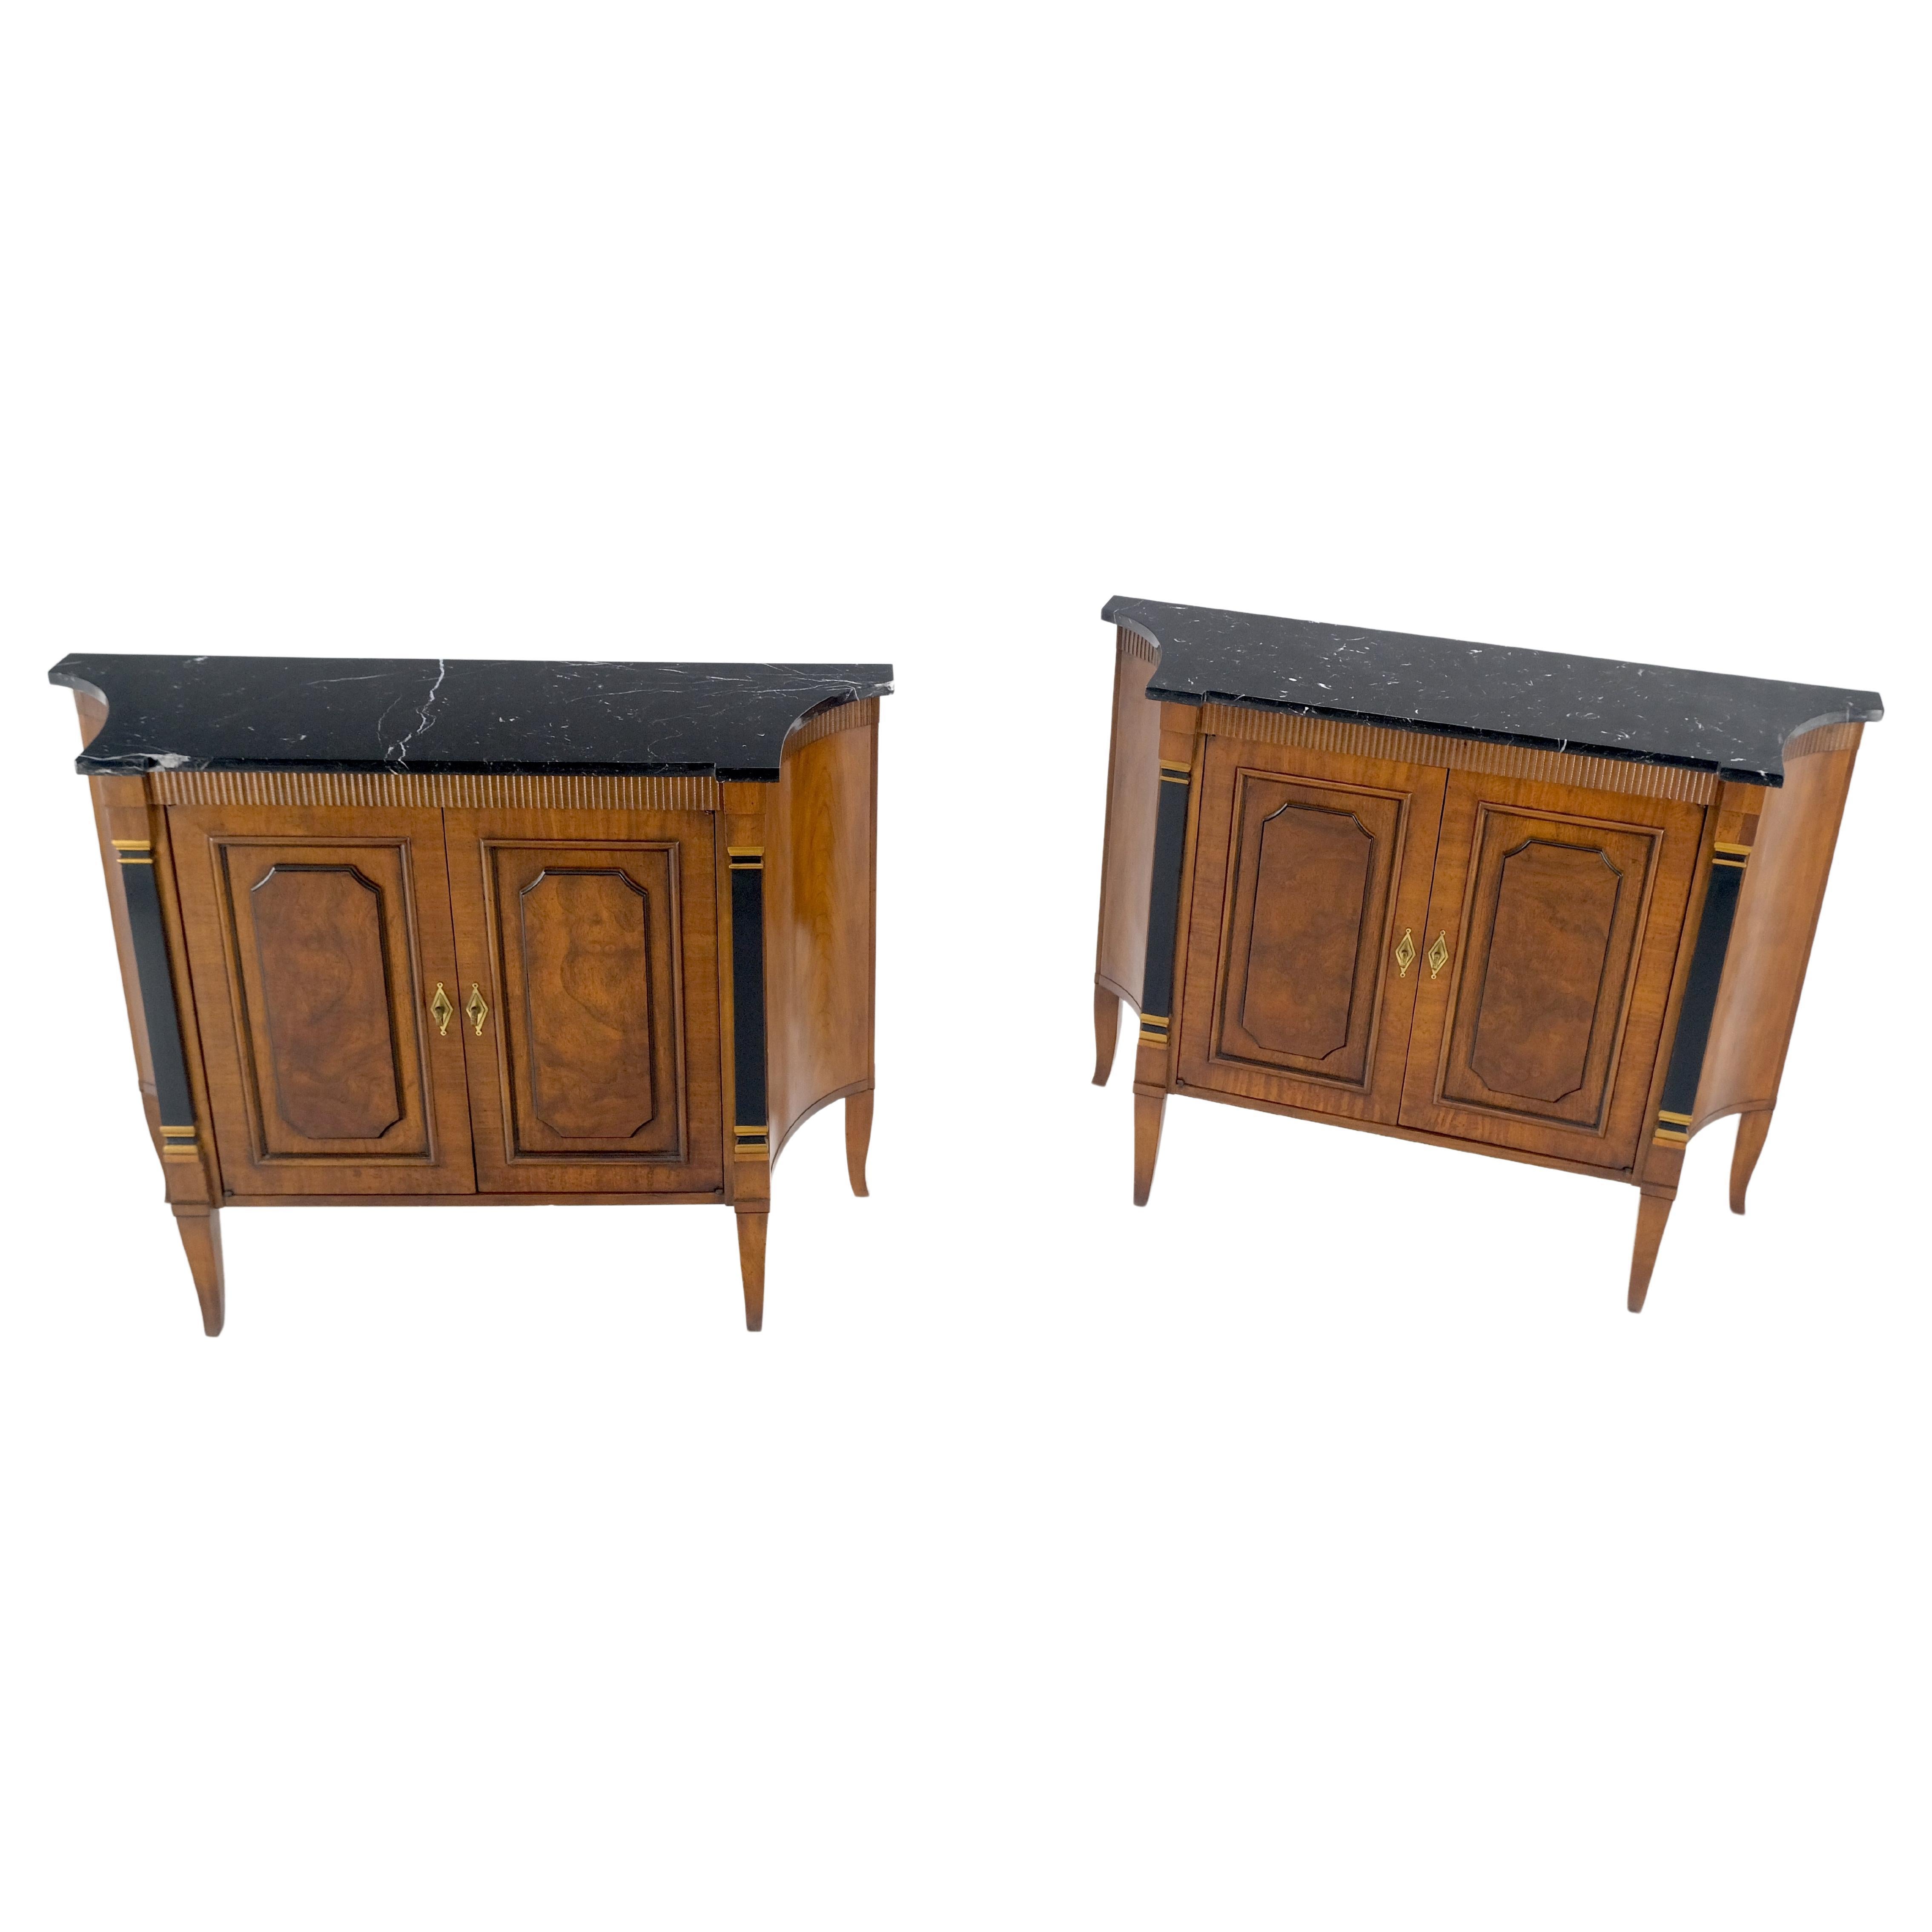 Pair Regency Style Burl Walnut Scallop Banding Black Marble Top Cabinets Credenzas Servers Sideboards MINT!